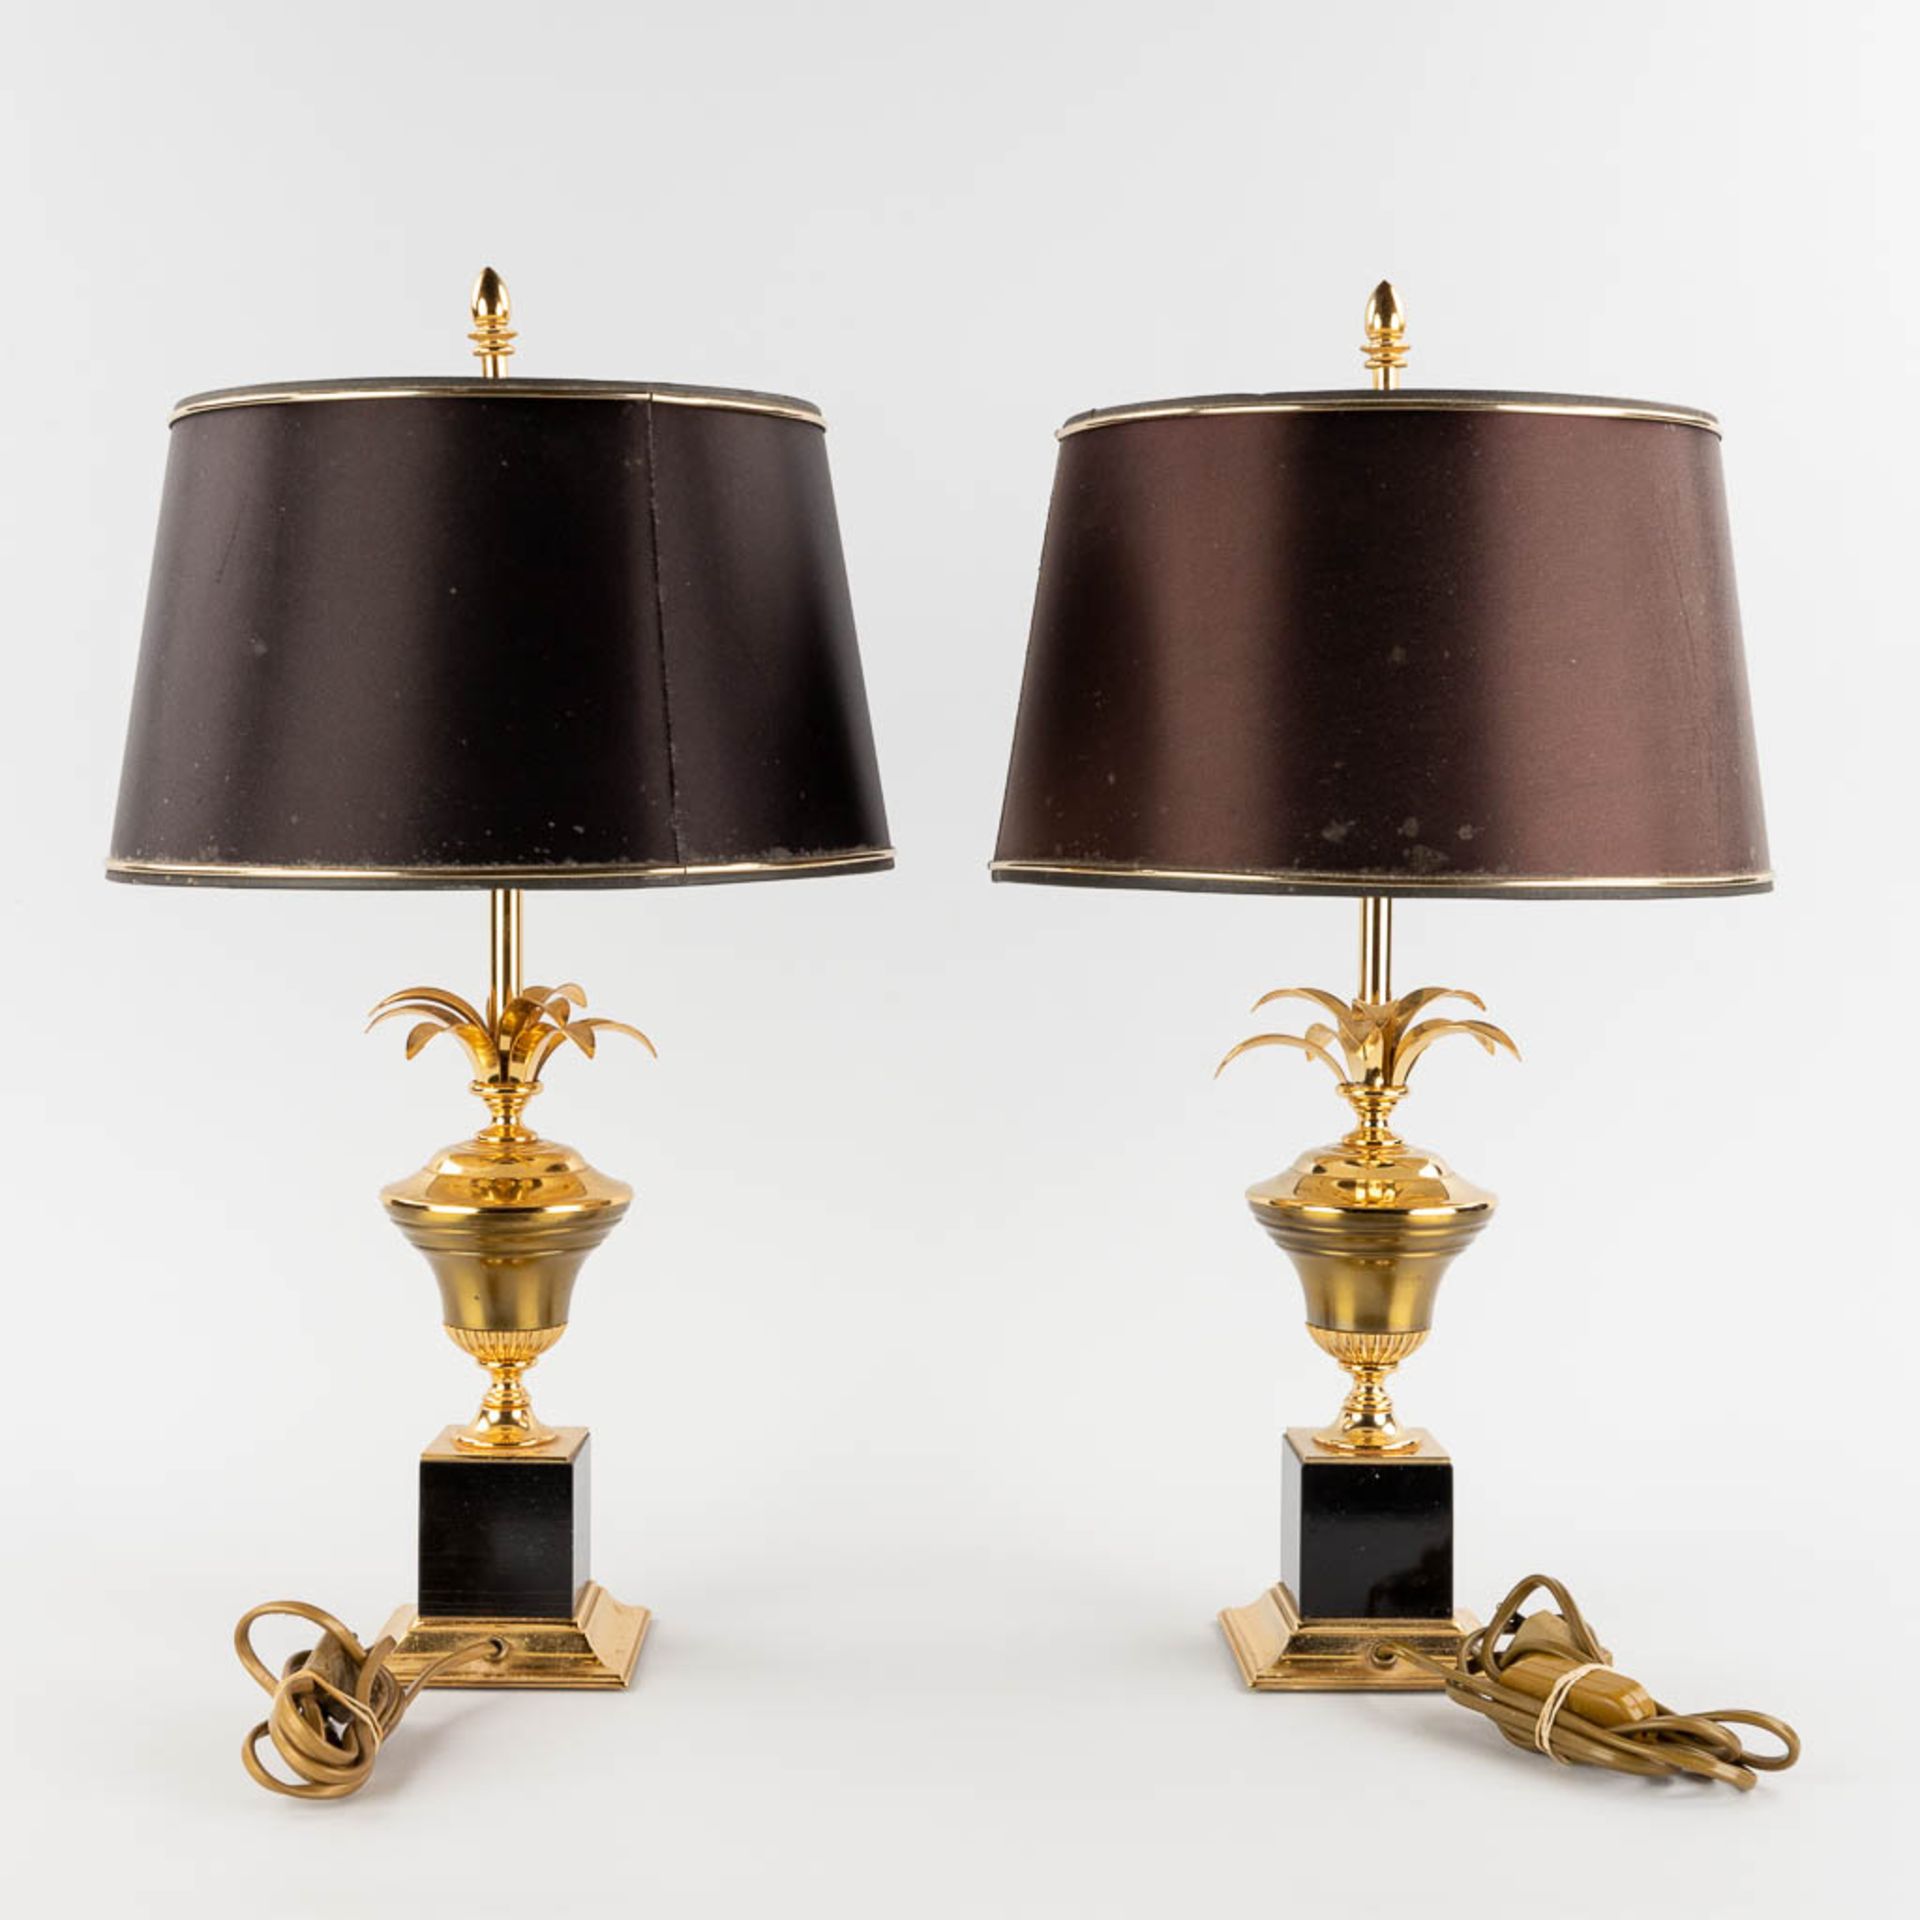 A pair of table lamps, Hollywood Regency style. 20th C. (H:54 x D:30 cm) - Image 4 of 10